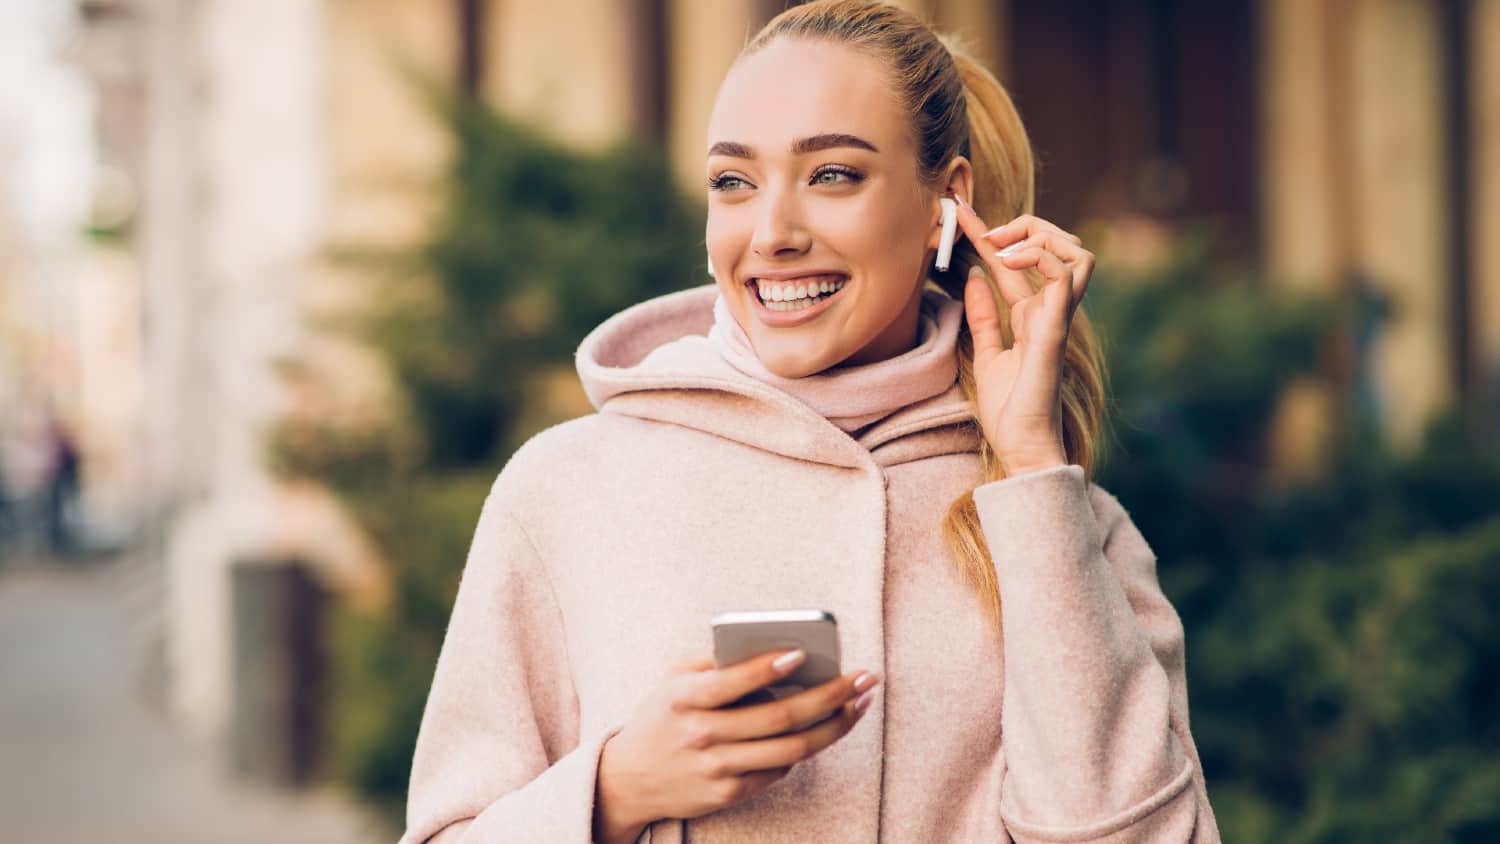 Smiling white woman holding iPhone with Airpods in ear